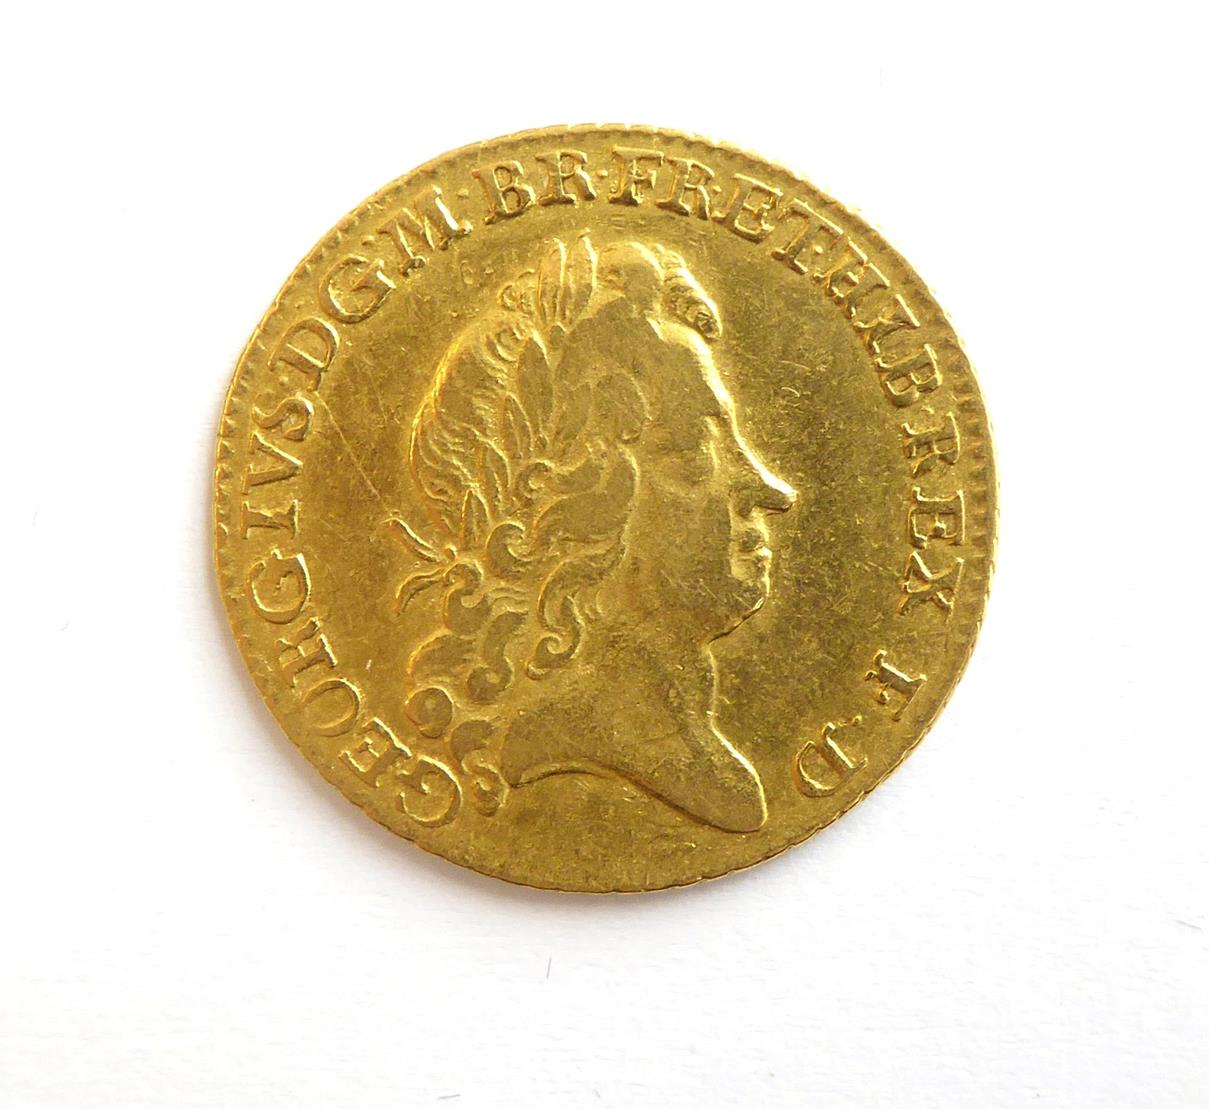 Lot 2047 - George I Guinea 1726 Fifth older Laur. Head, Tie with 2 ends VF S3633 Rare especially in this grade